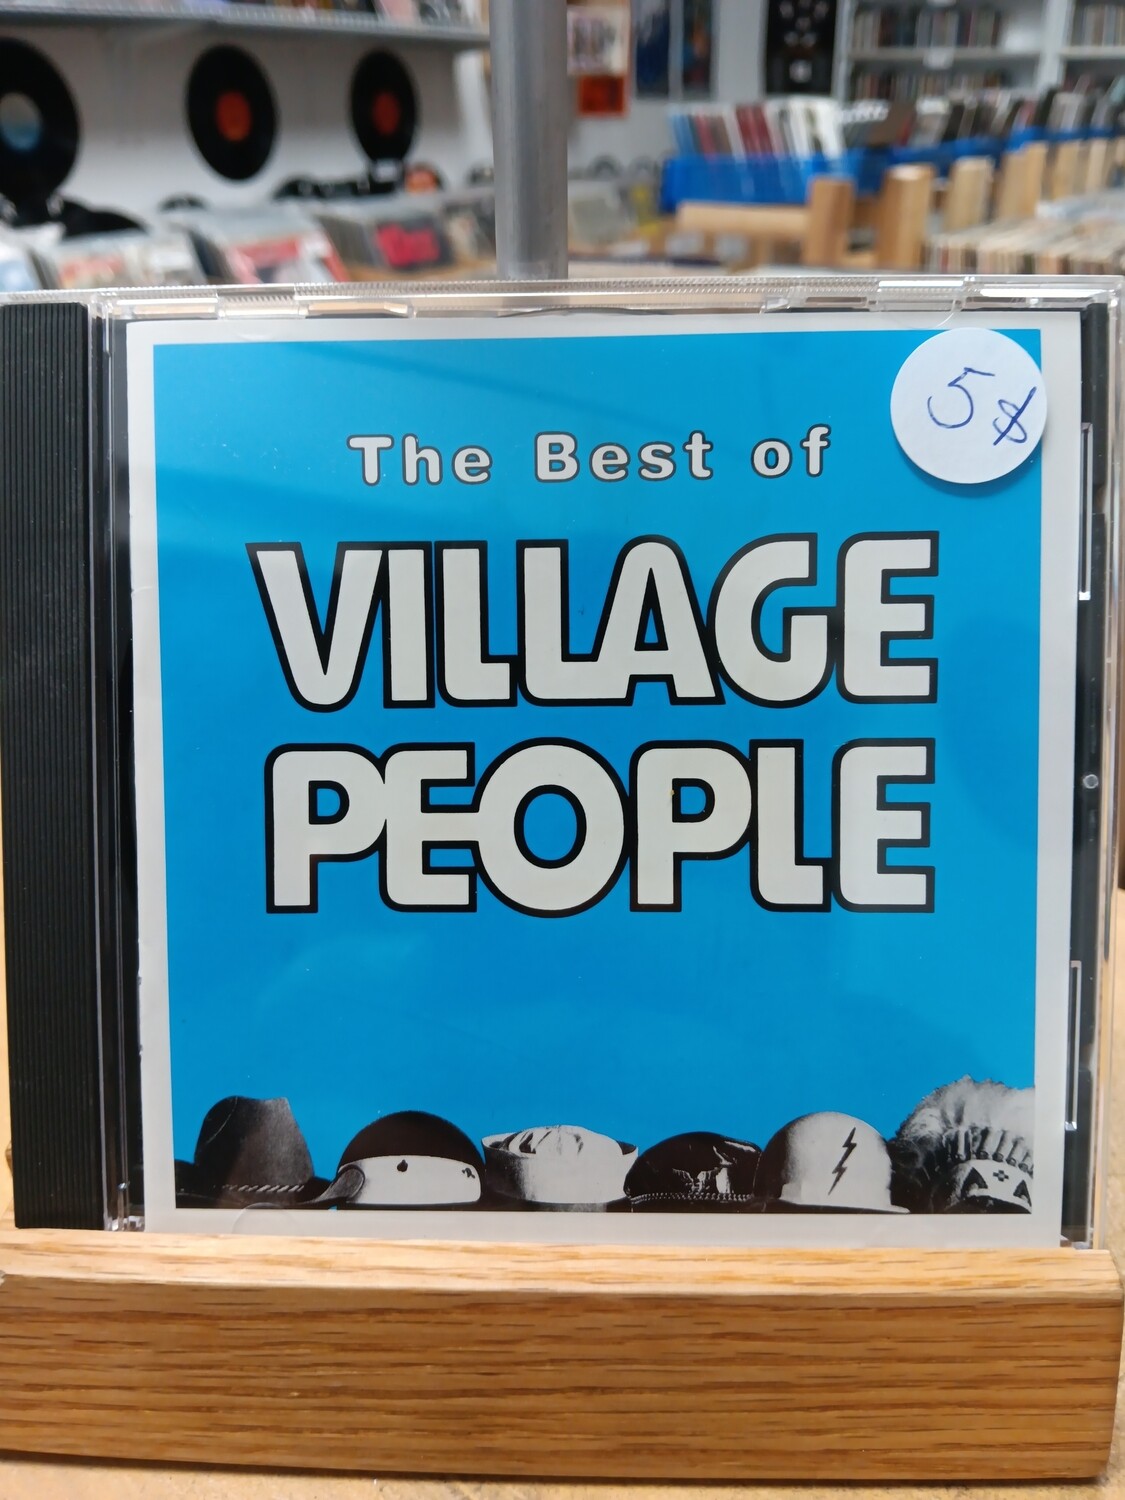 VILLAGE PEOPLE - The Best of (CD)